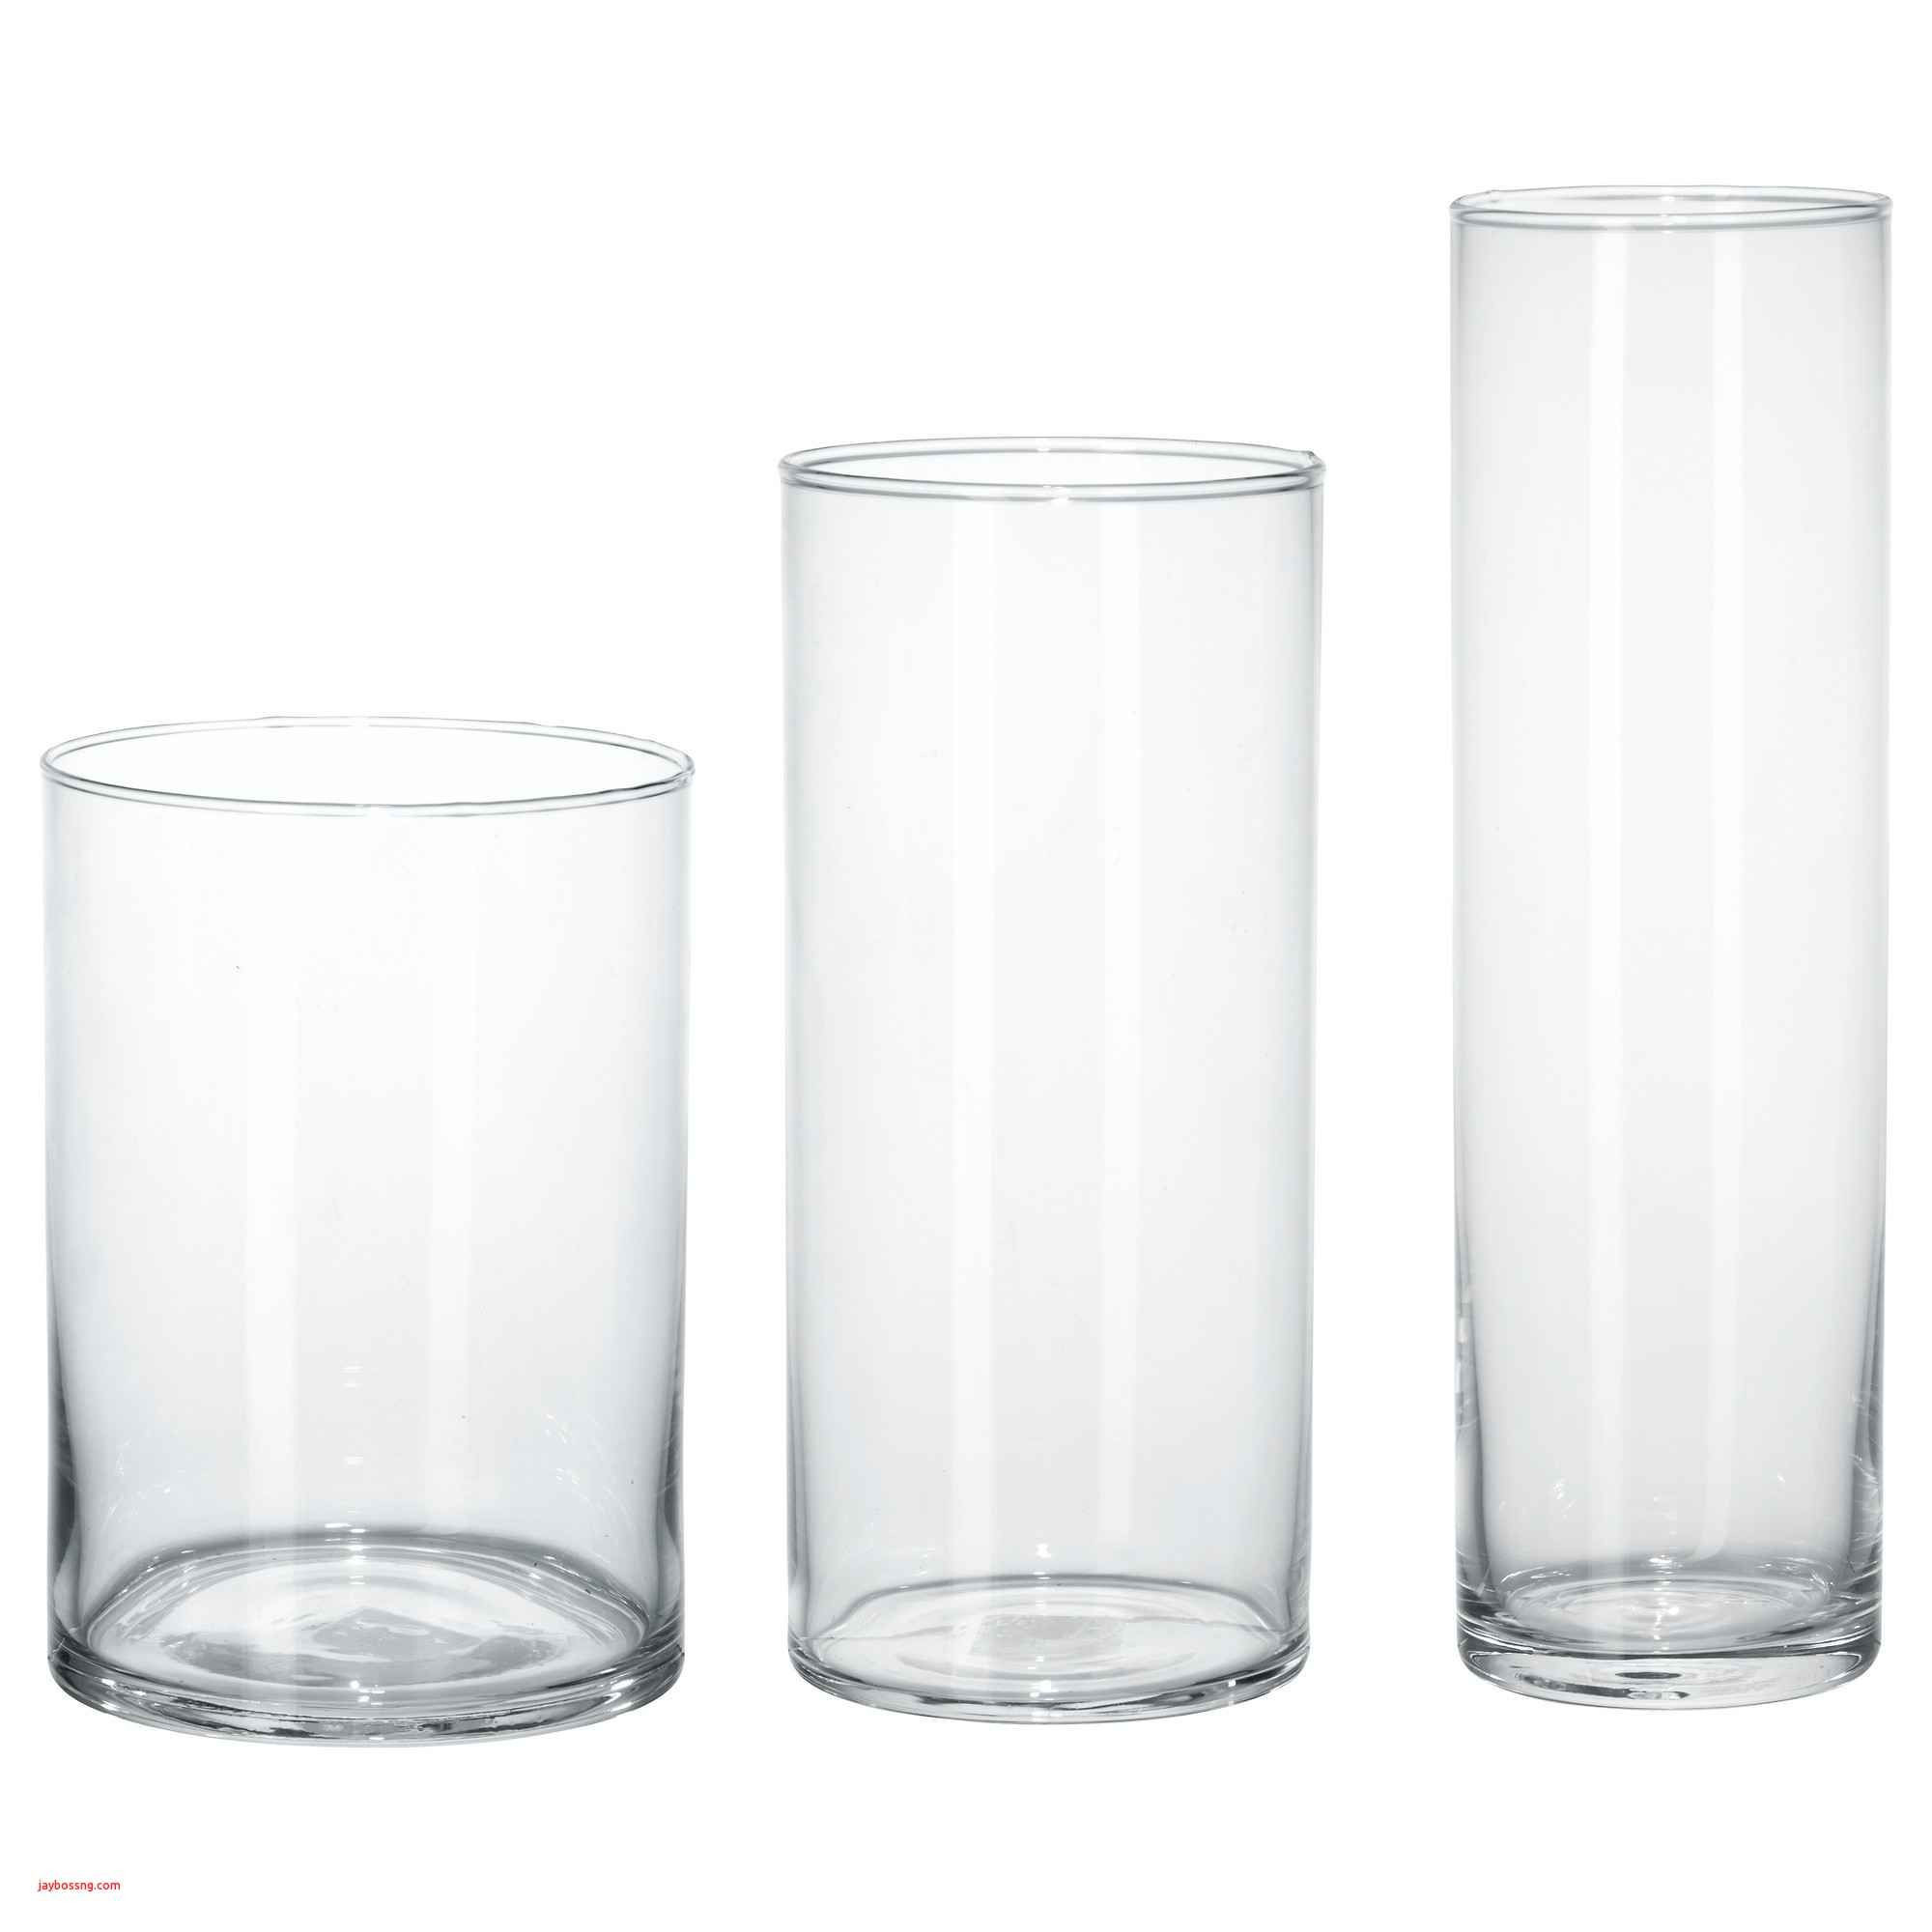 22 Lovable Yellow Vases Ikea 2024 free download yellow vases ikea of brown glass vase fresh ikea white table created pe s5h vases ikea intended for brown glass vase fresh ikea white table created pe s5h vases ikea vase i 0d bladet